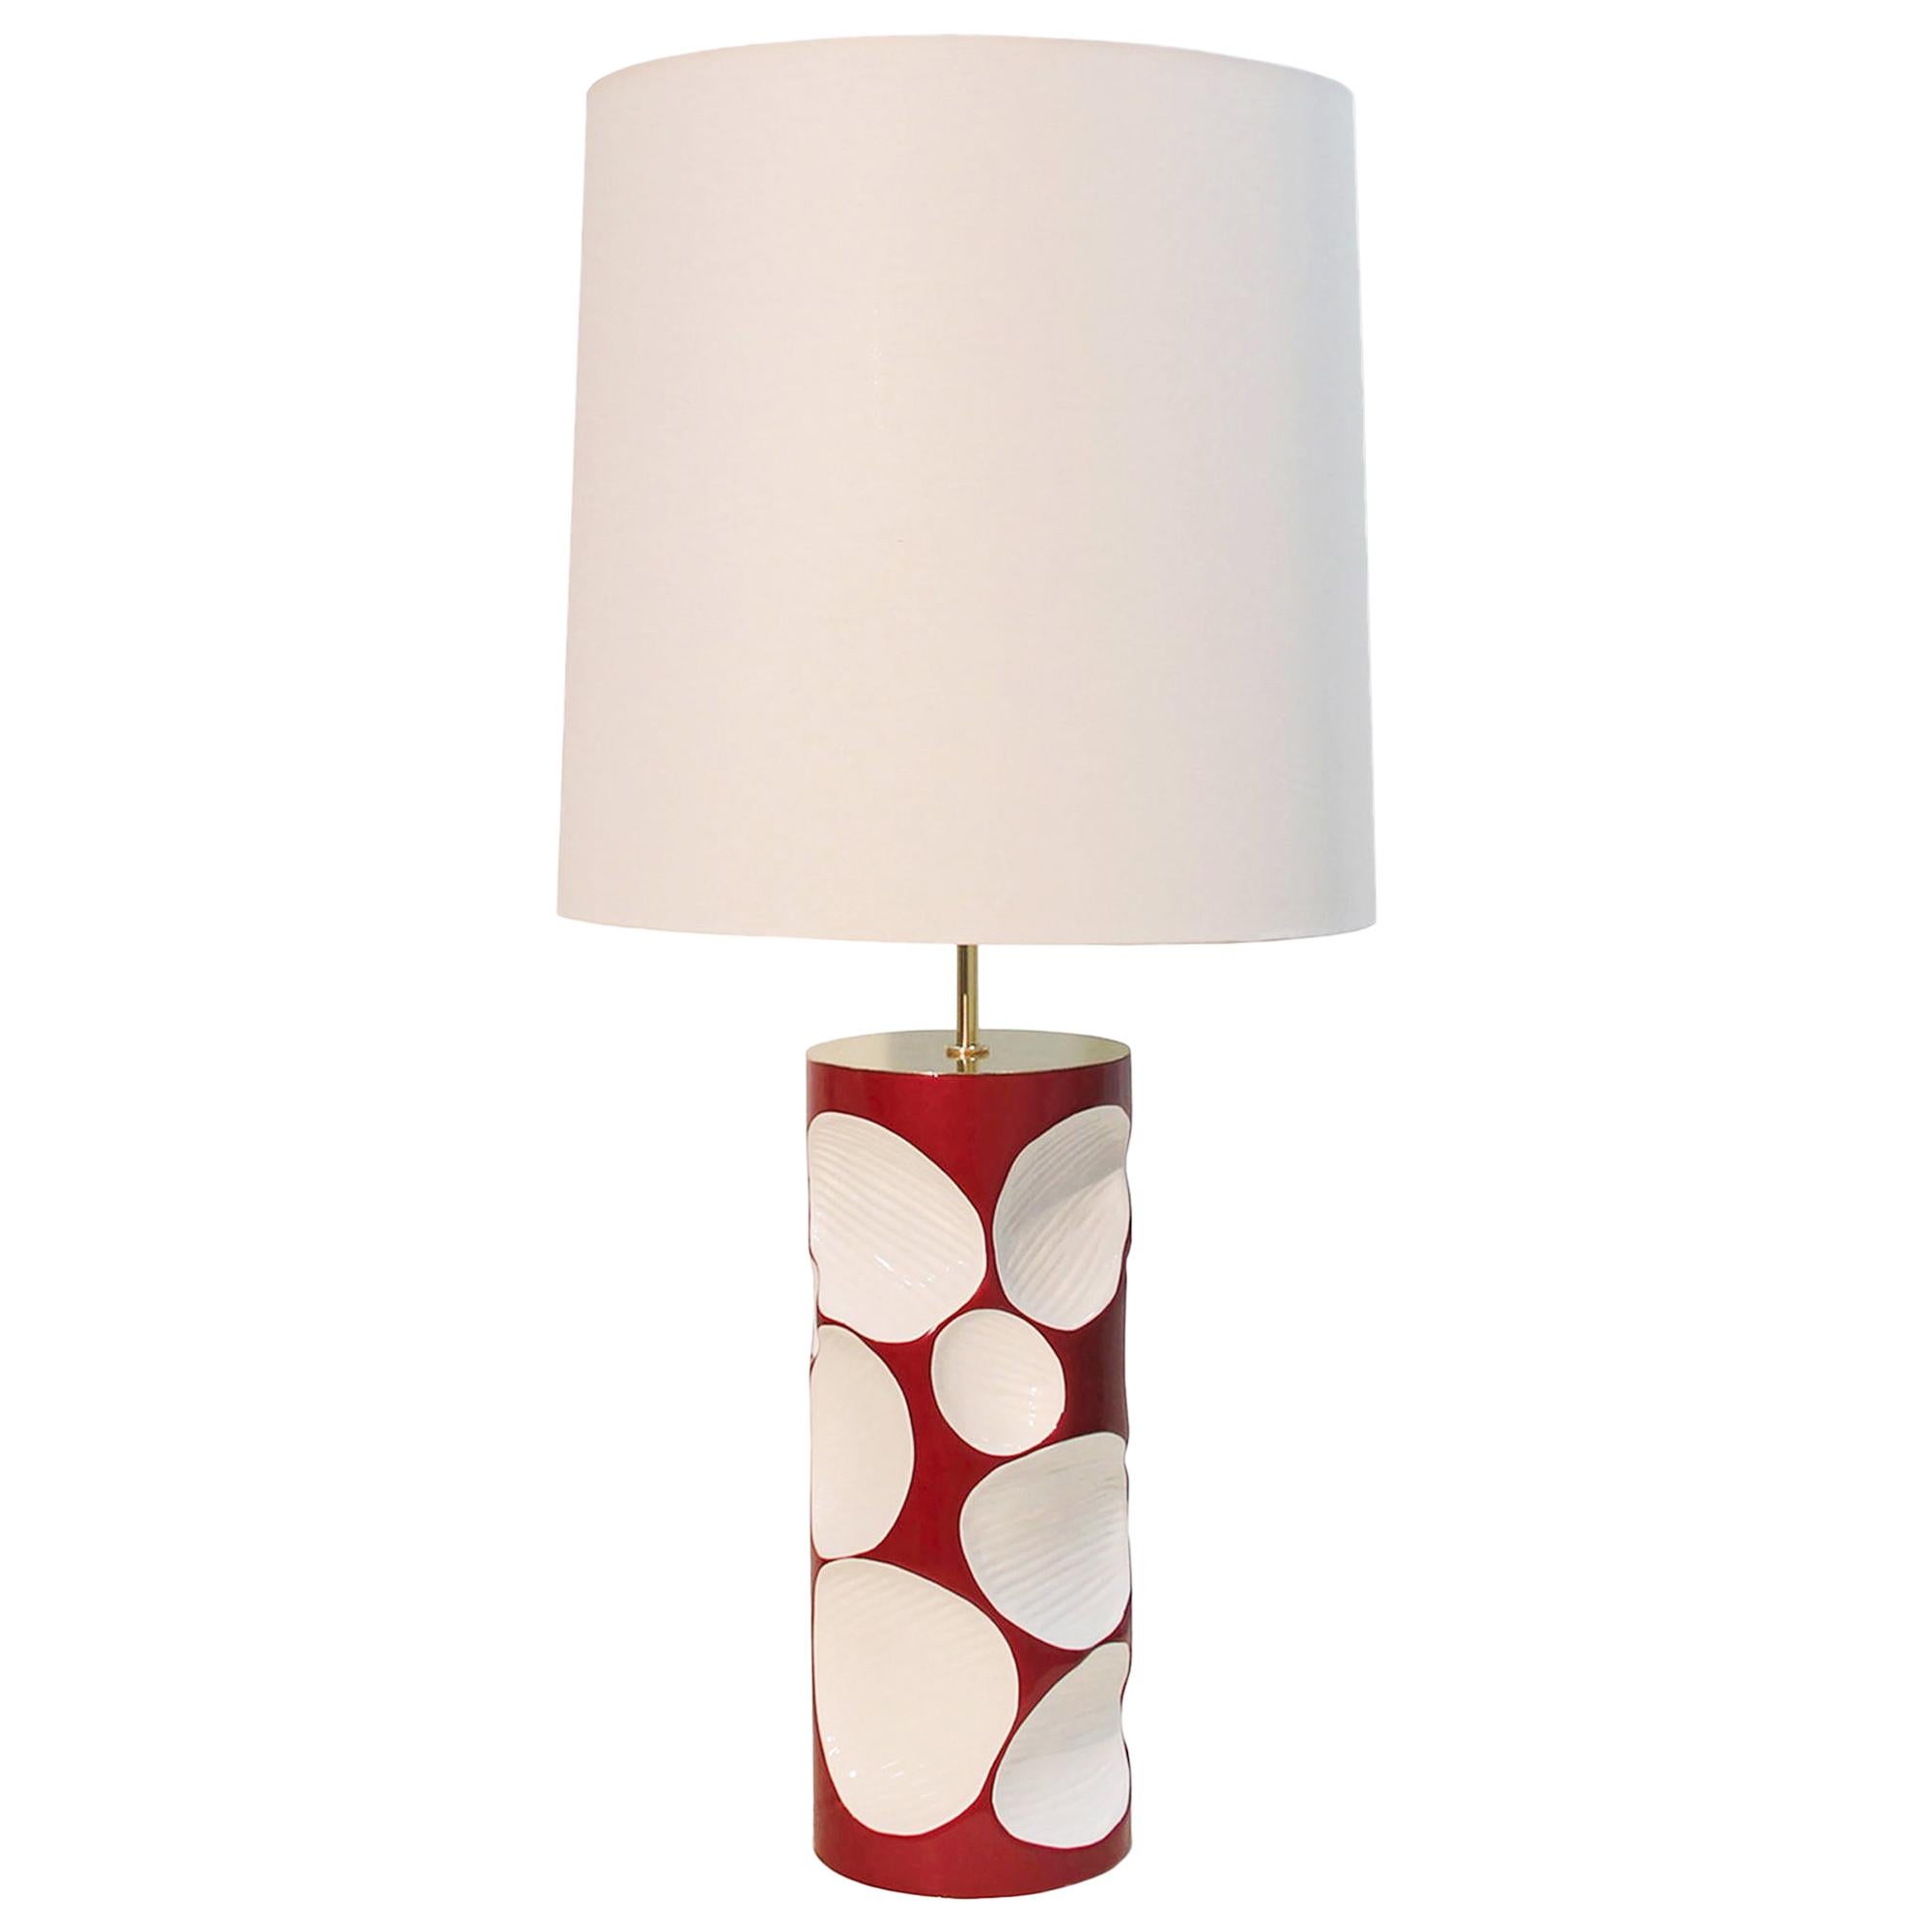 Allia Table Lamp in Red Lacquered Finish For Sale